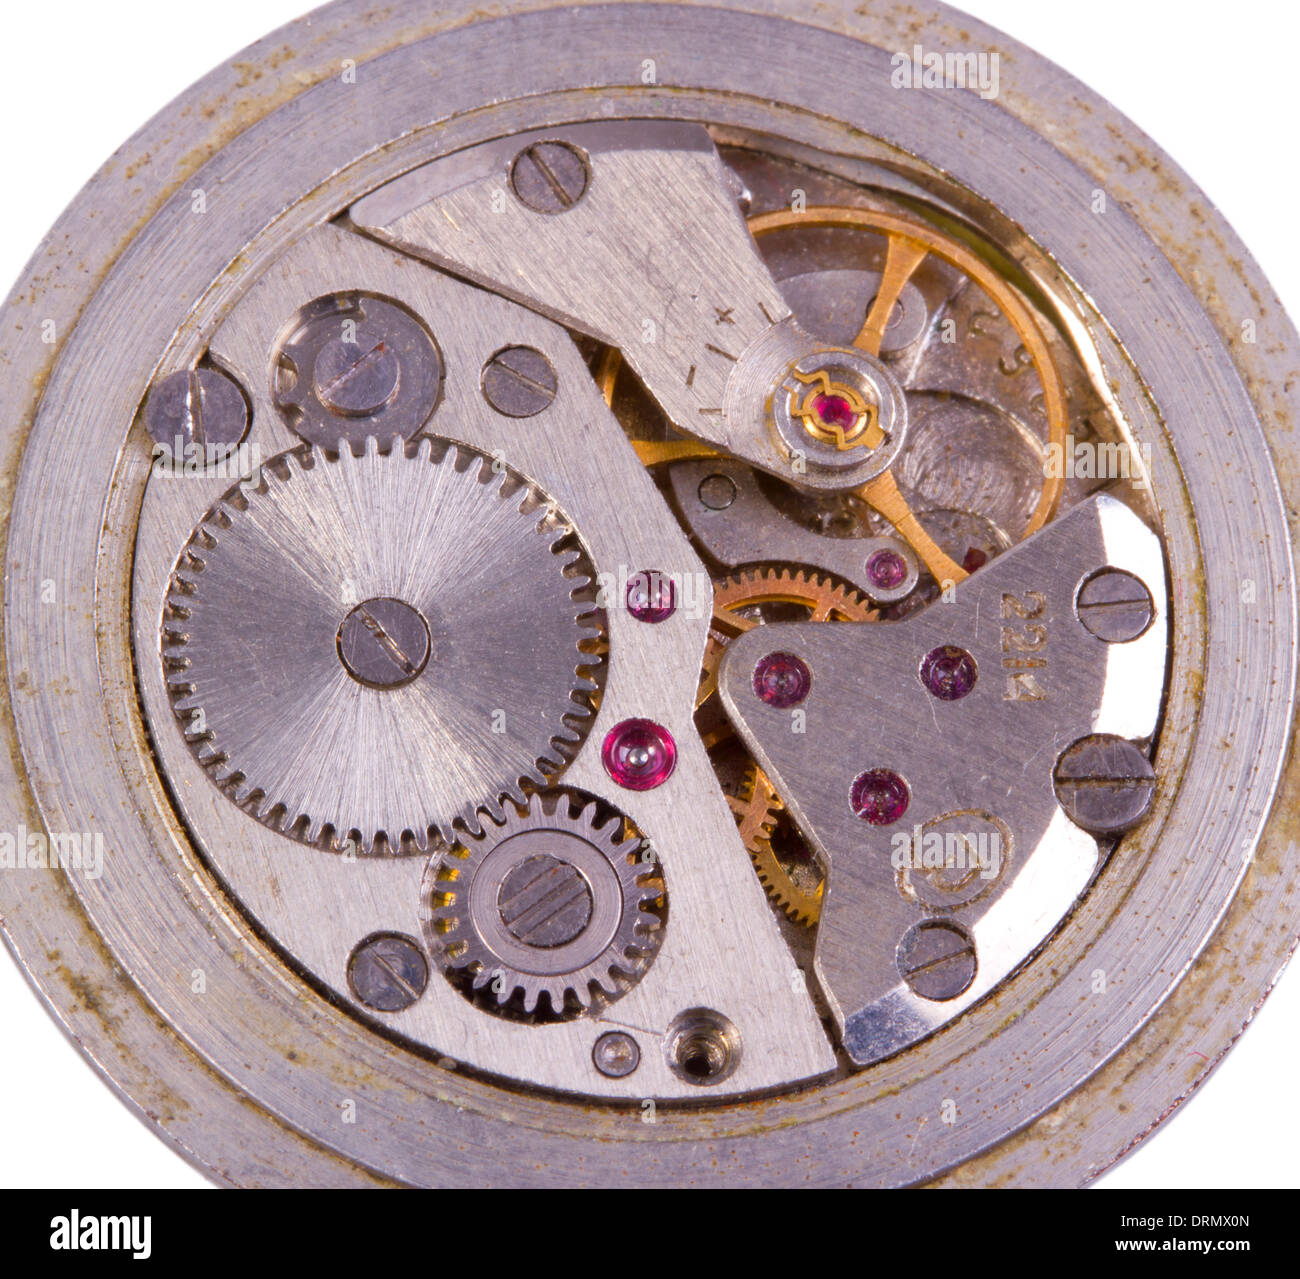 Details of a wrist watch close up Stock Photo